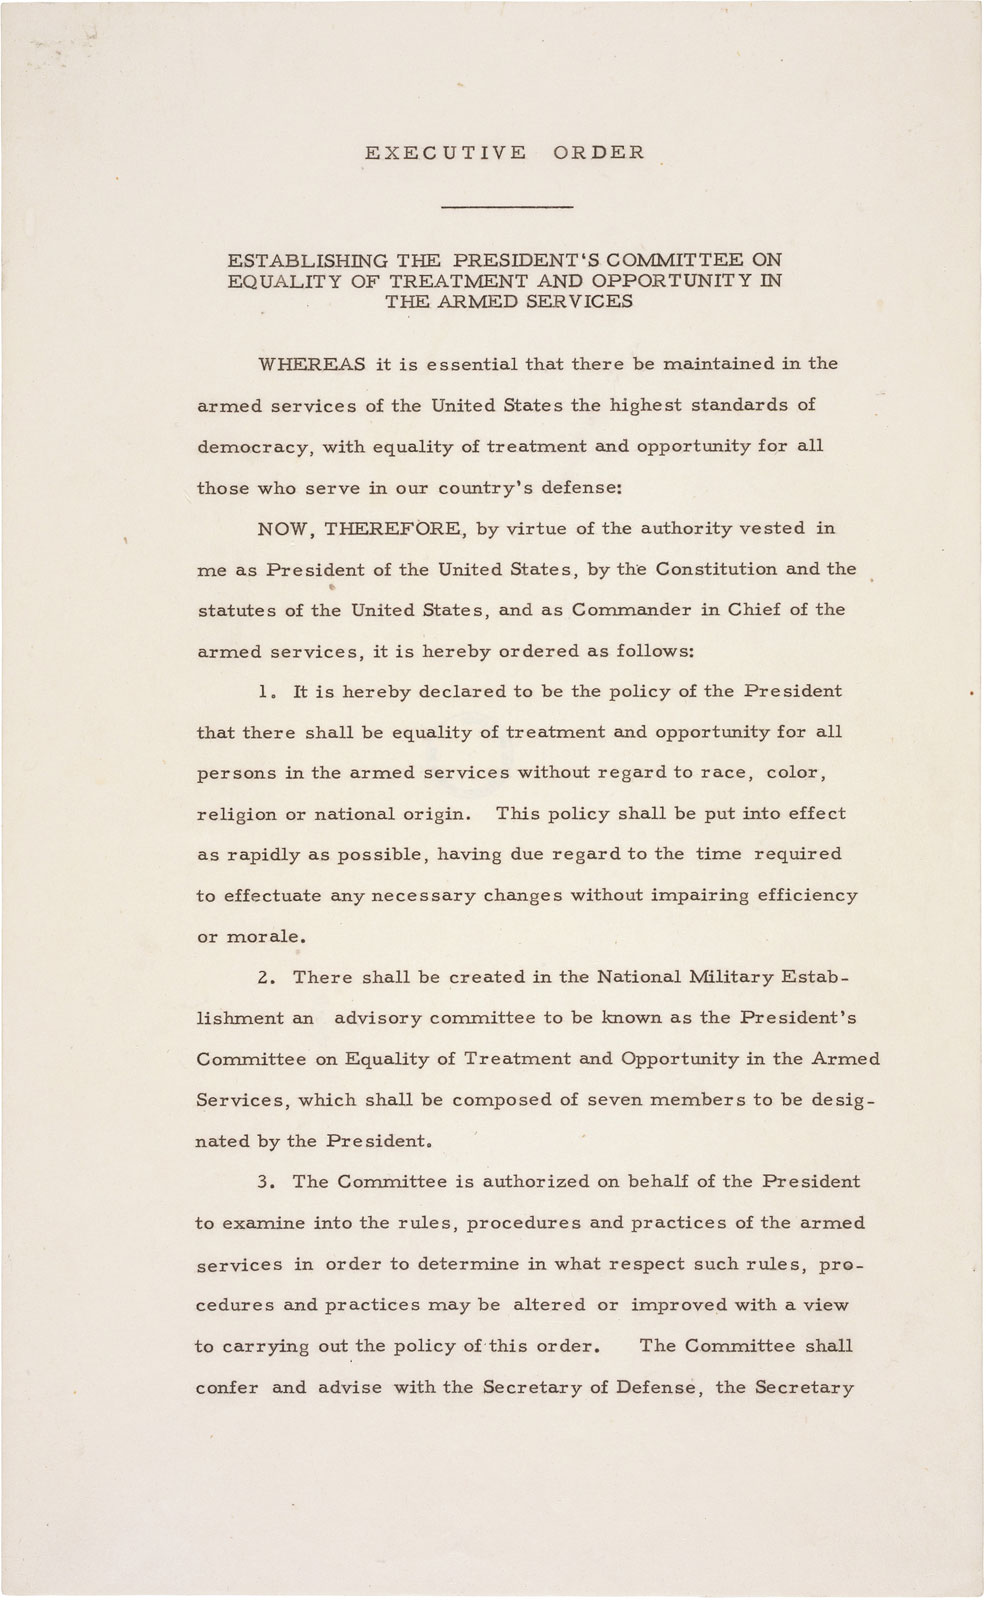 President Truman’s Executive Order, signed July 26, 1948, that desegregated the U.S. military.